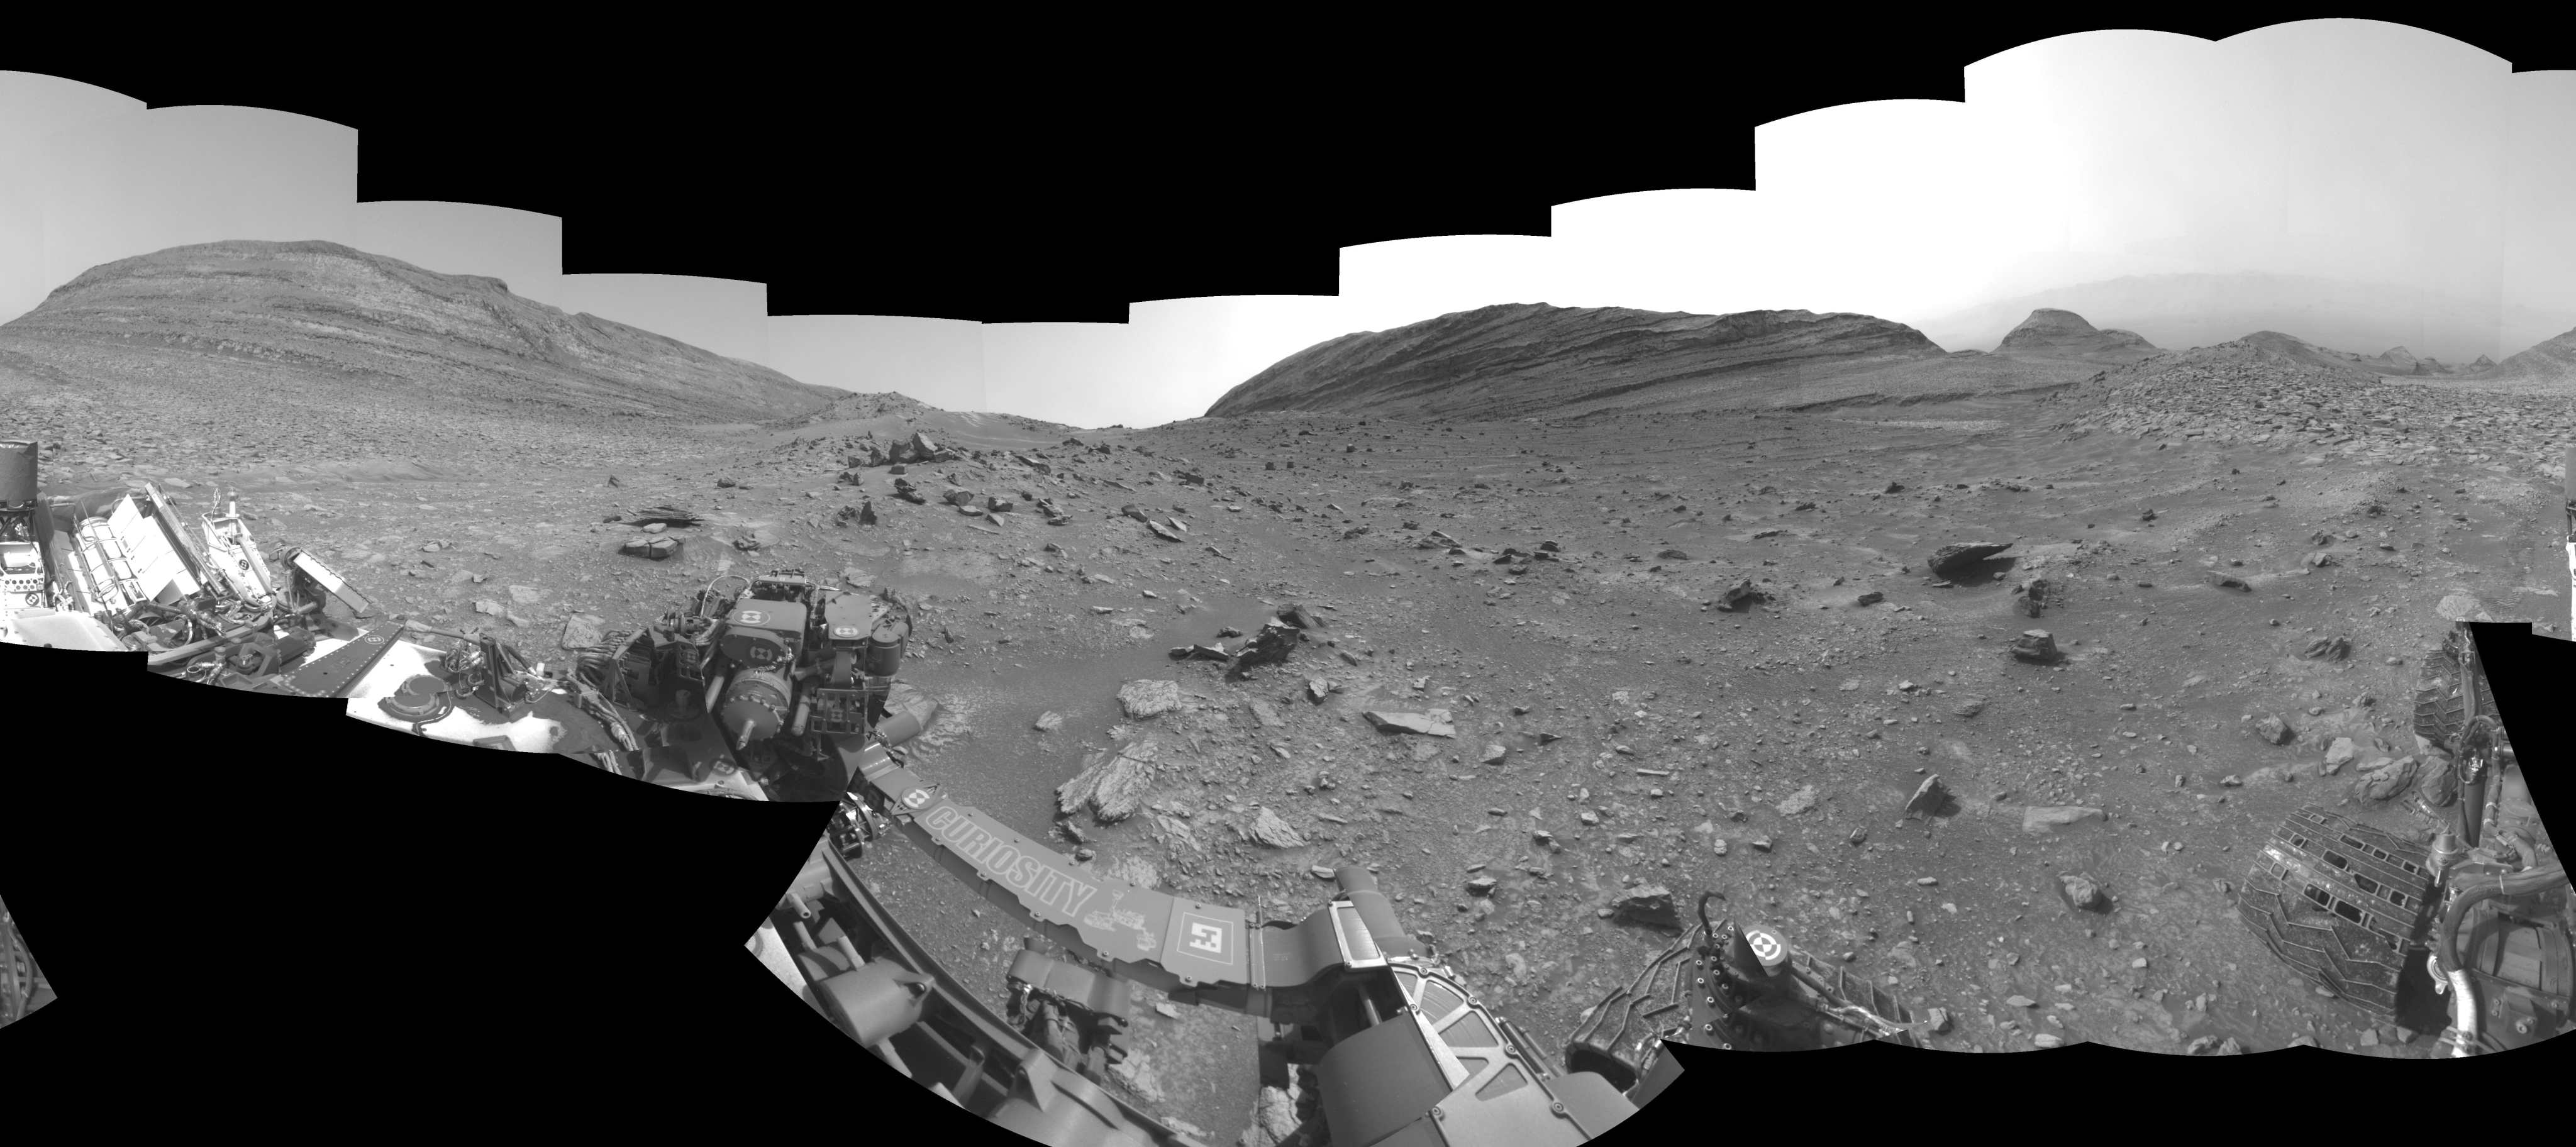 This single-eye view must be combined with the partner right image to be viewed in stereo. Curiosity took the images on May 23, 2024, Sol 4193 of the Mars Science Laboratory mission at drive 2054, site number 107. The local mean solar time for the image exposures was 2